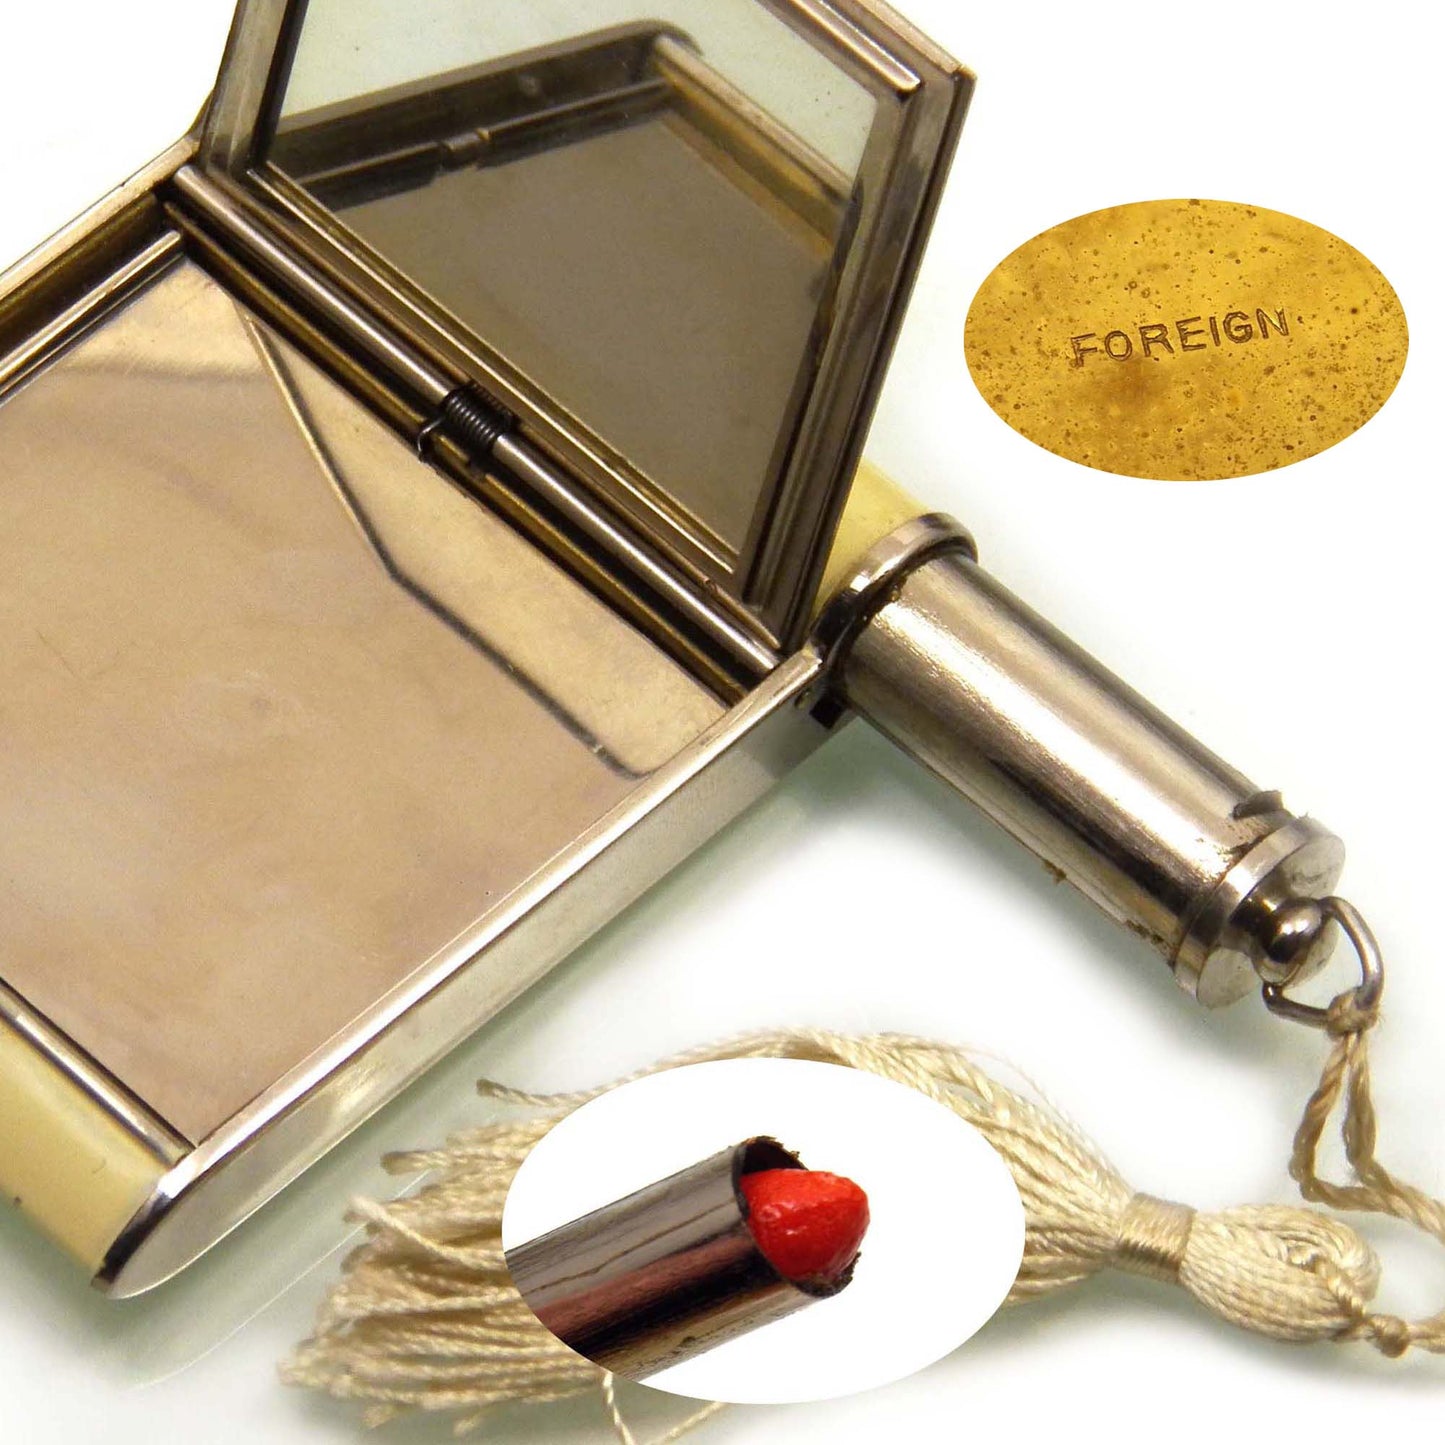 Art Deco Camera Powder Compact with Lipstick and Silk Tassel, Foreign Germany 1930s